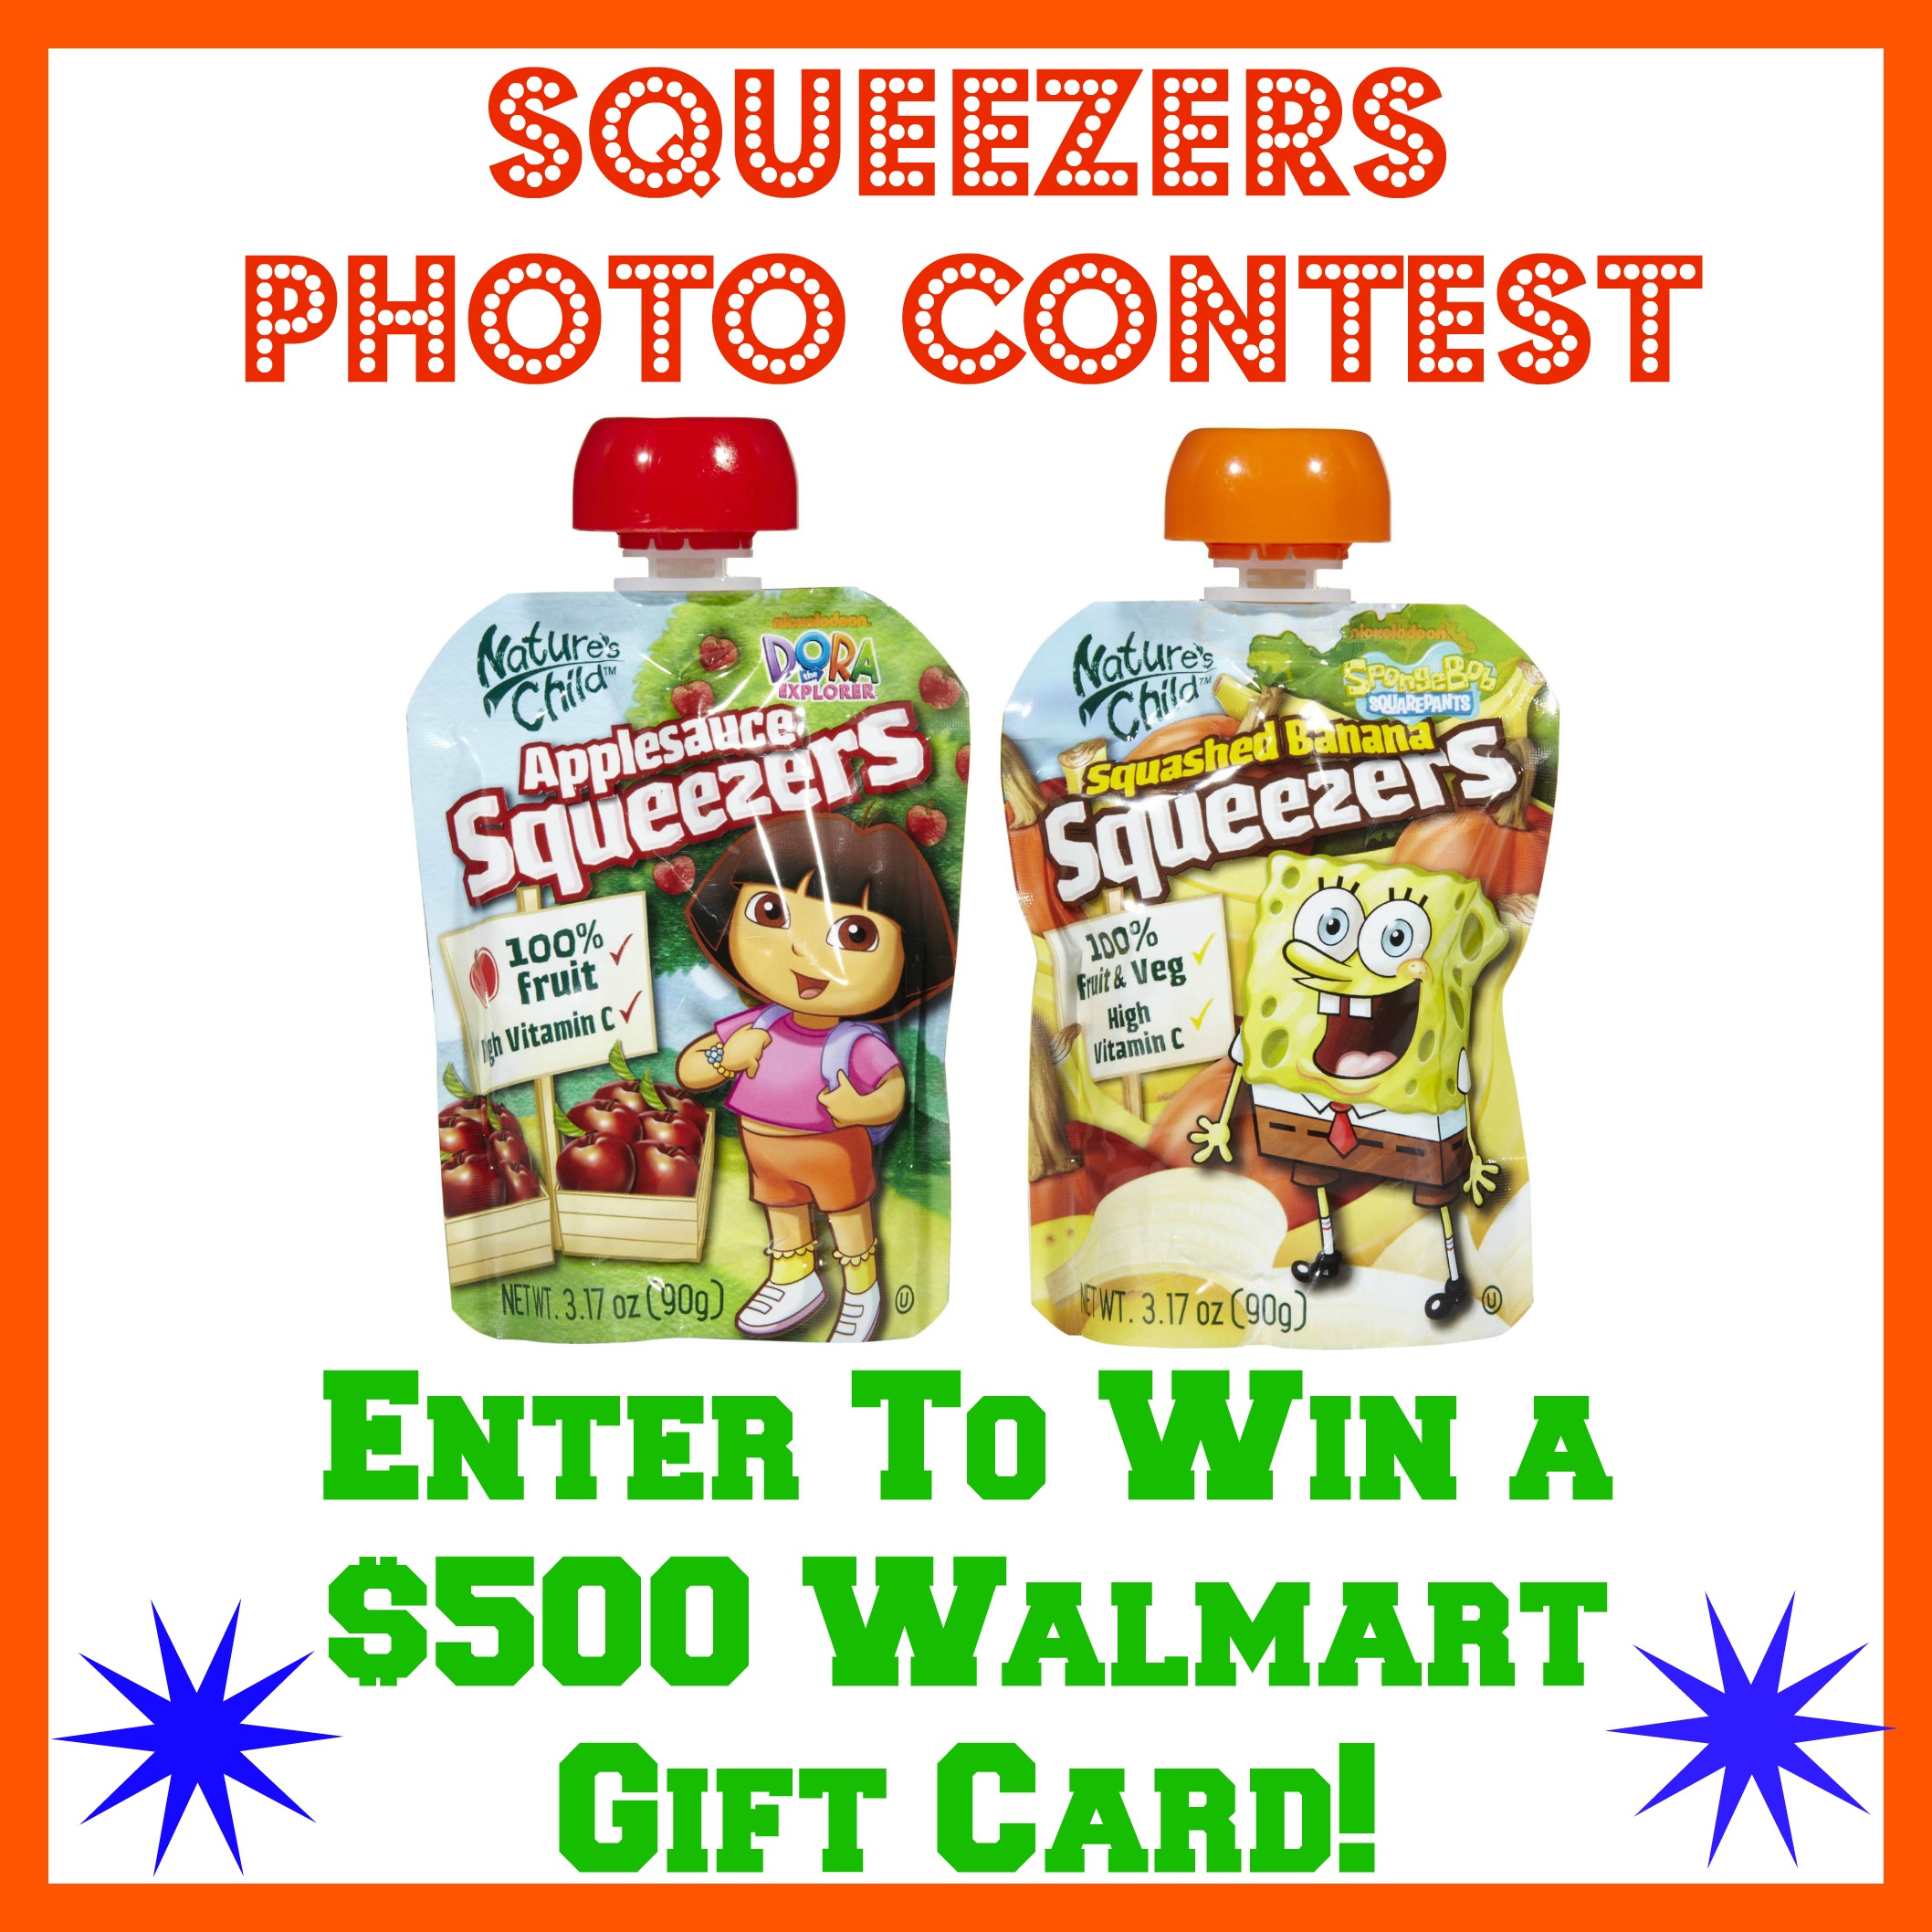 Squeezers Photo Contest: Win a $500 Walmart Gift Card!